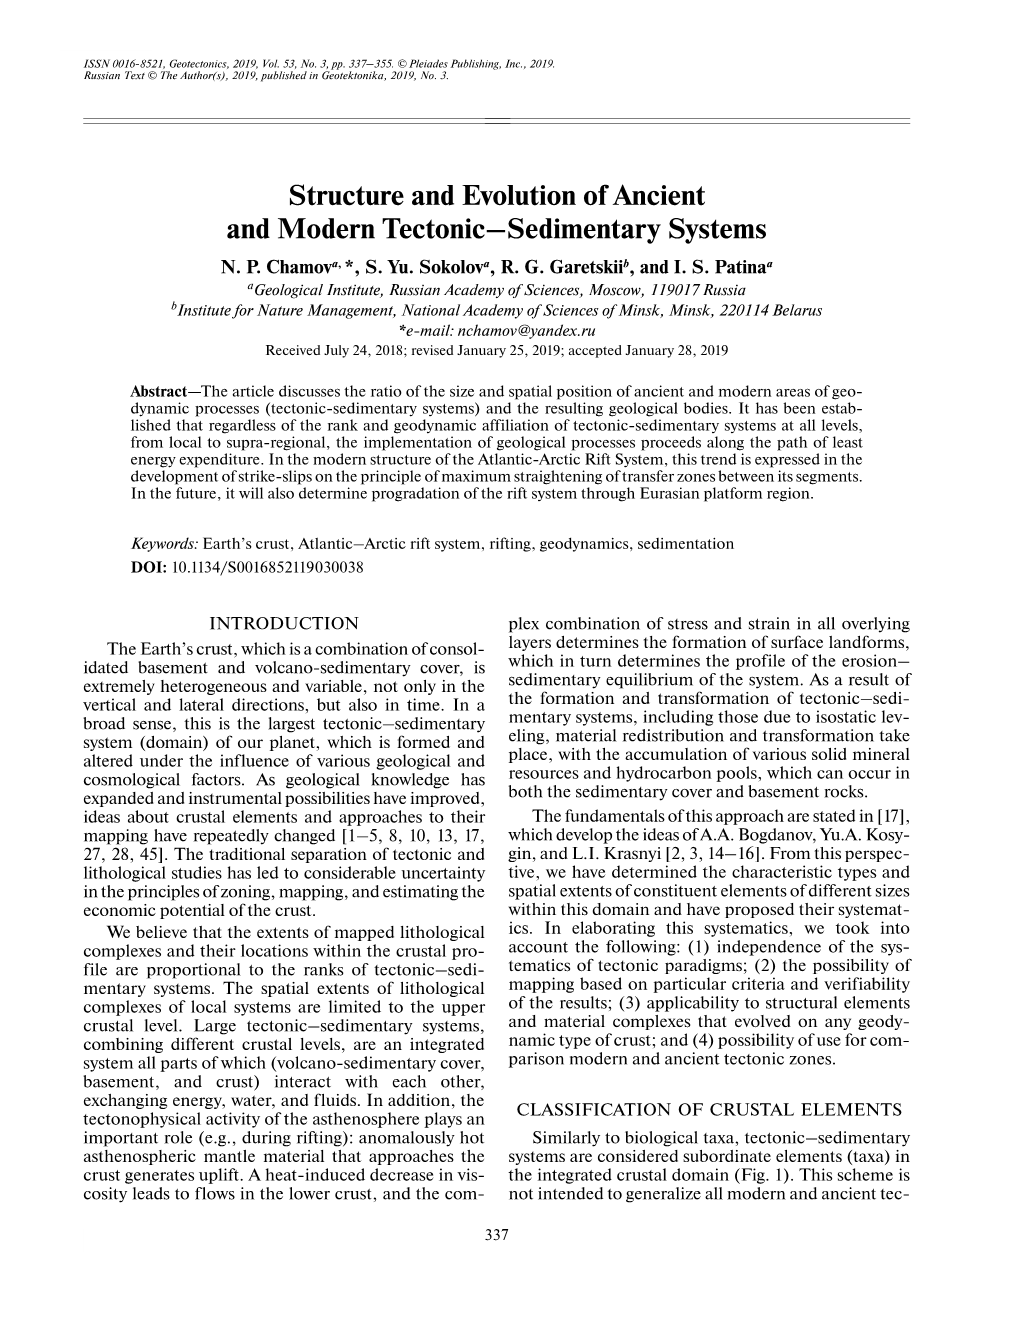 Structure and Evolution of Ancient and Modern Tectonic–Sedimentary Systems N